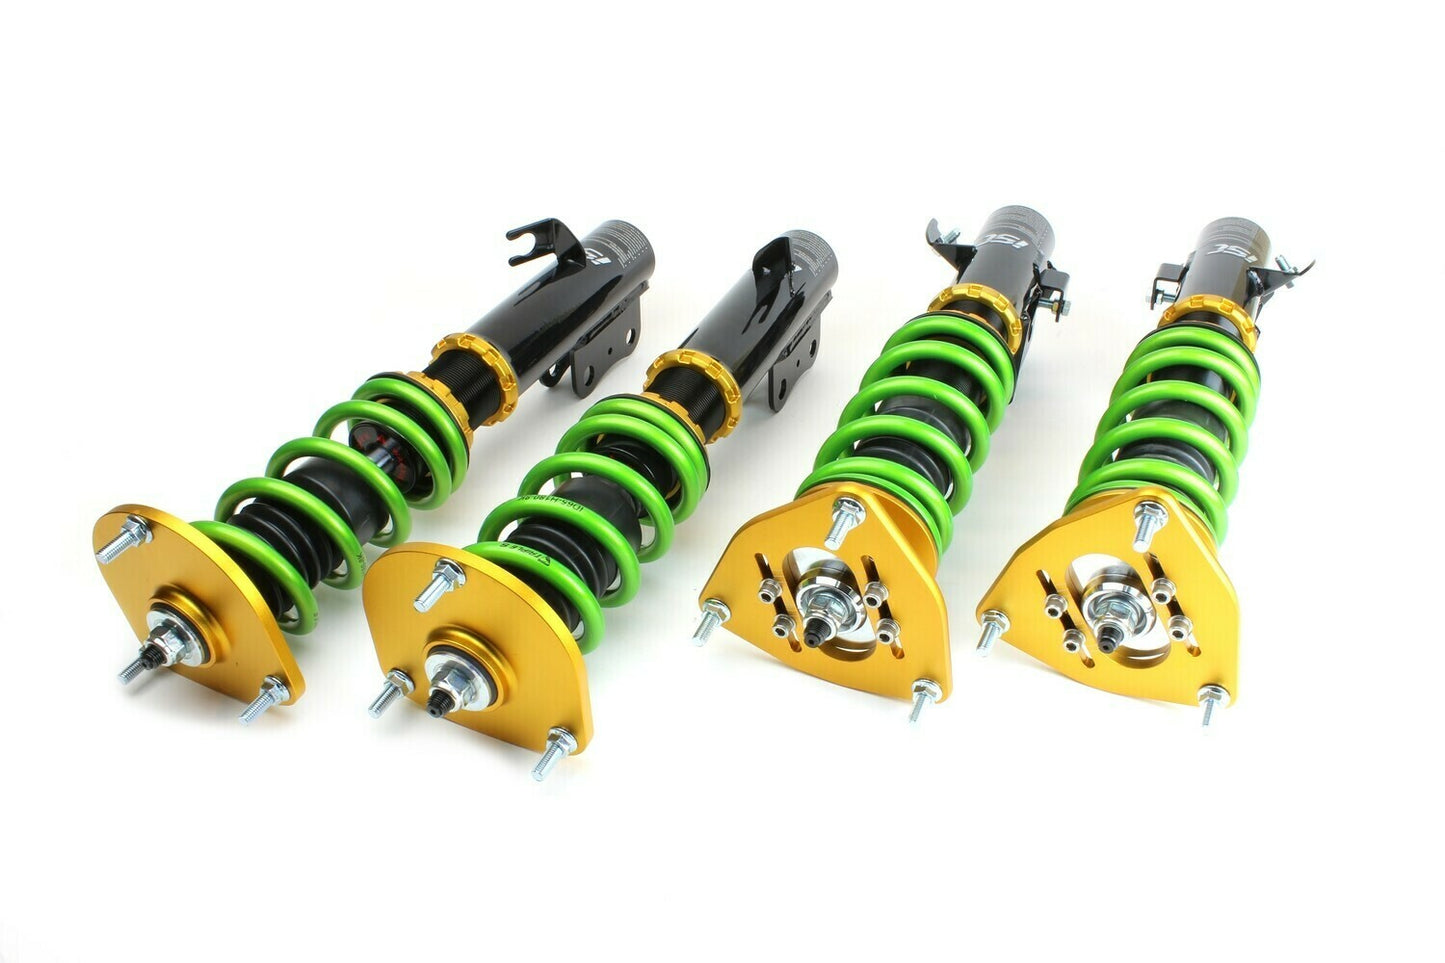 ACURA NSX 91-05 ISC N1 V2 COILOVER SUSPENSION WITH COILOVER COVERS